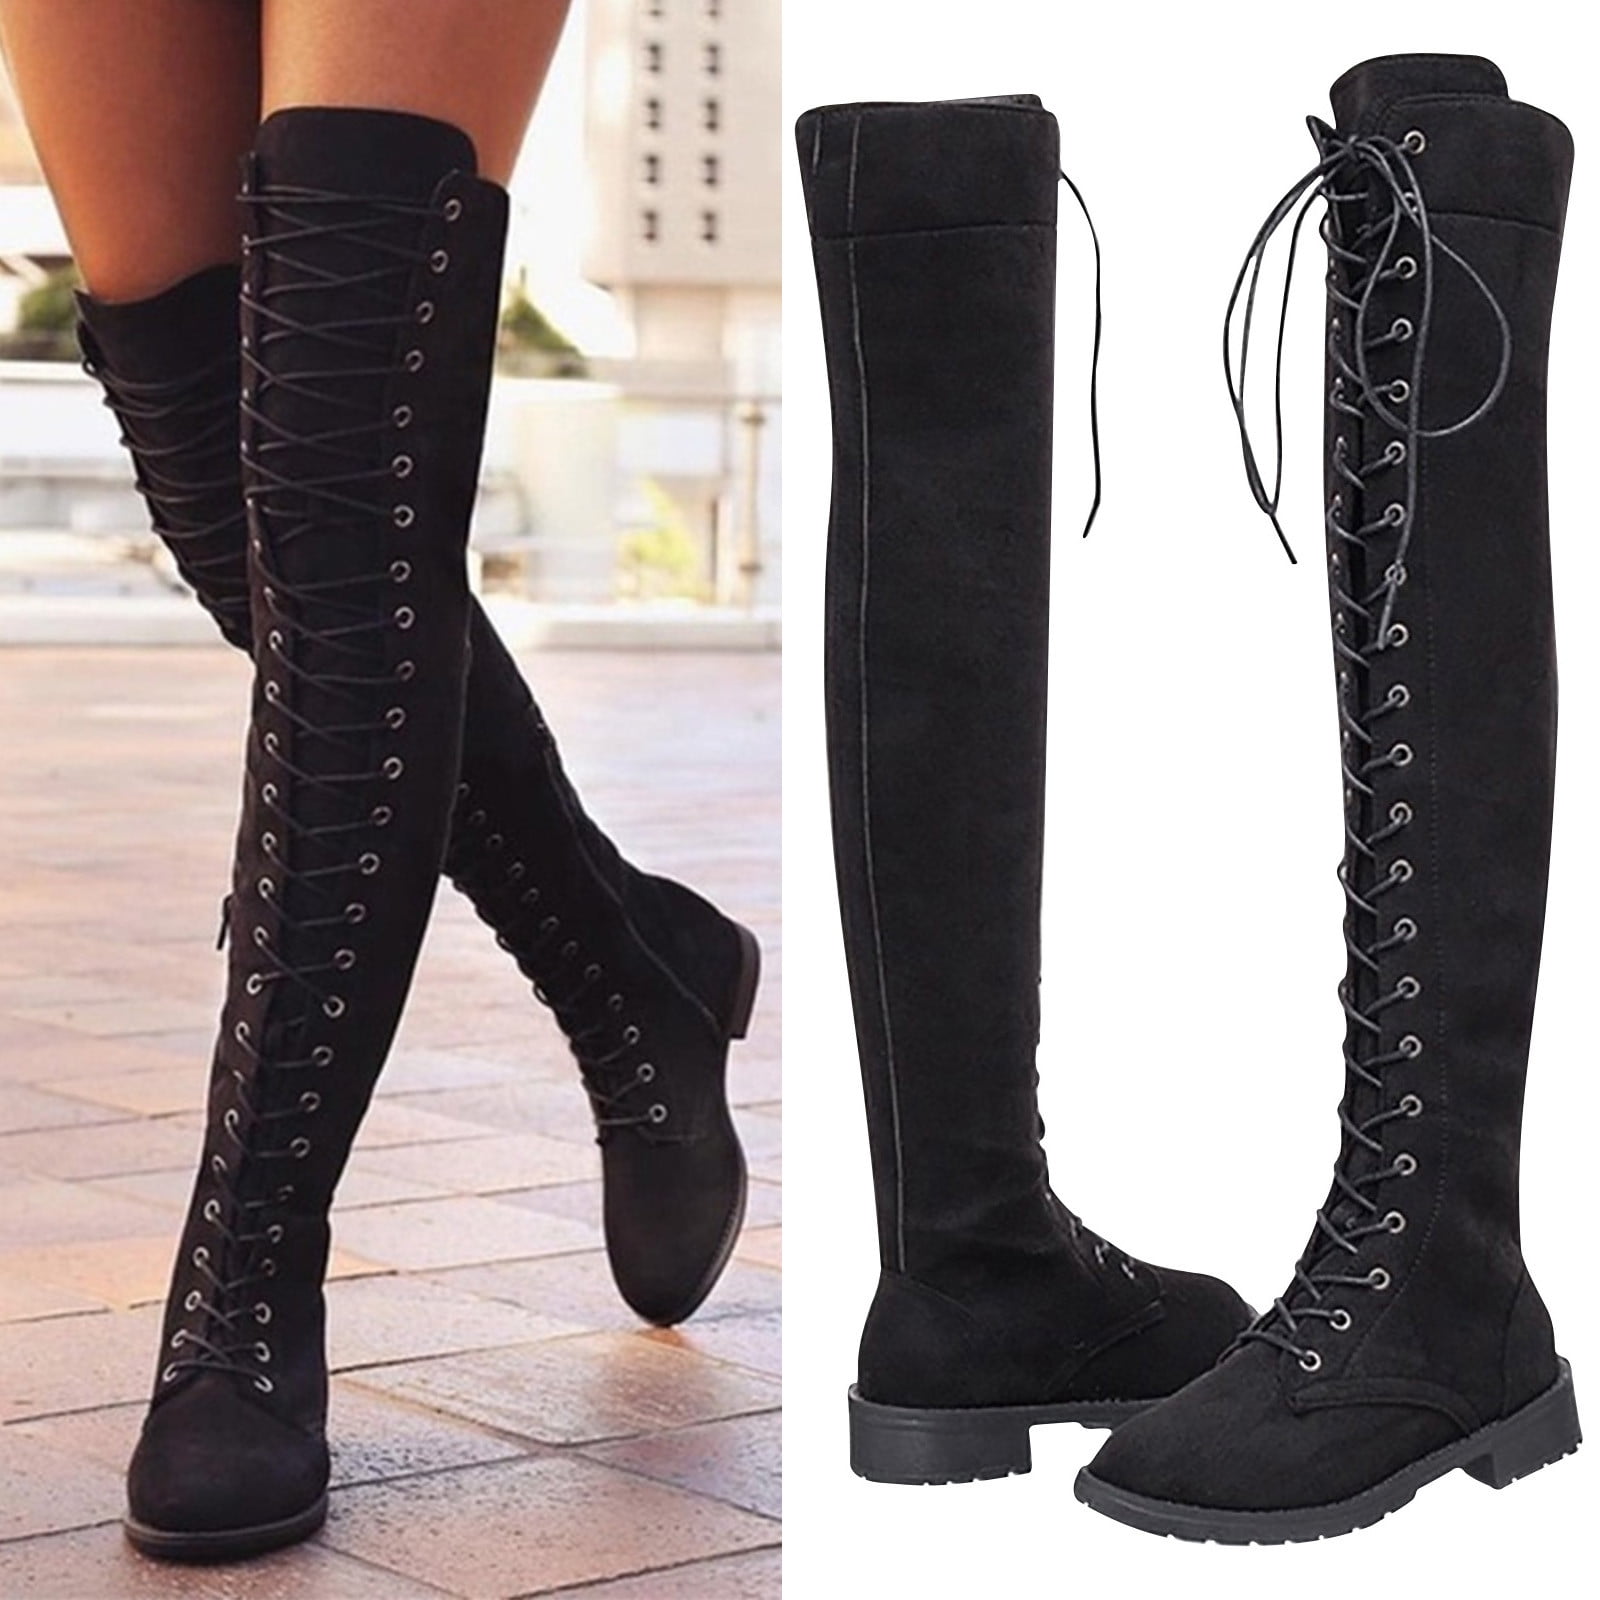 Womens Over The Knee High Boots Winter Flat Wide Leg Stretch Zip Low Heel Shoes 